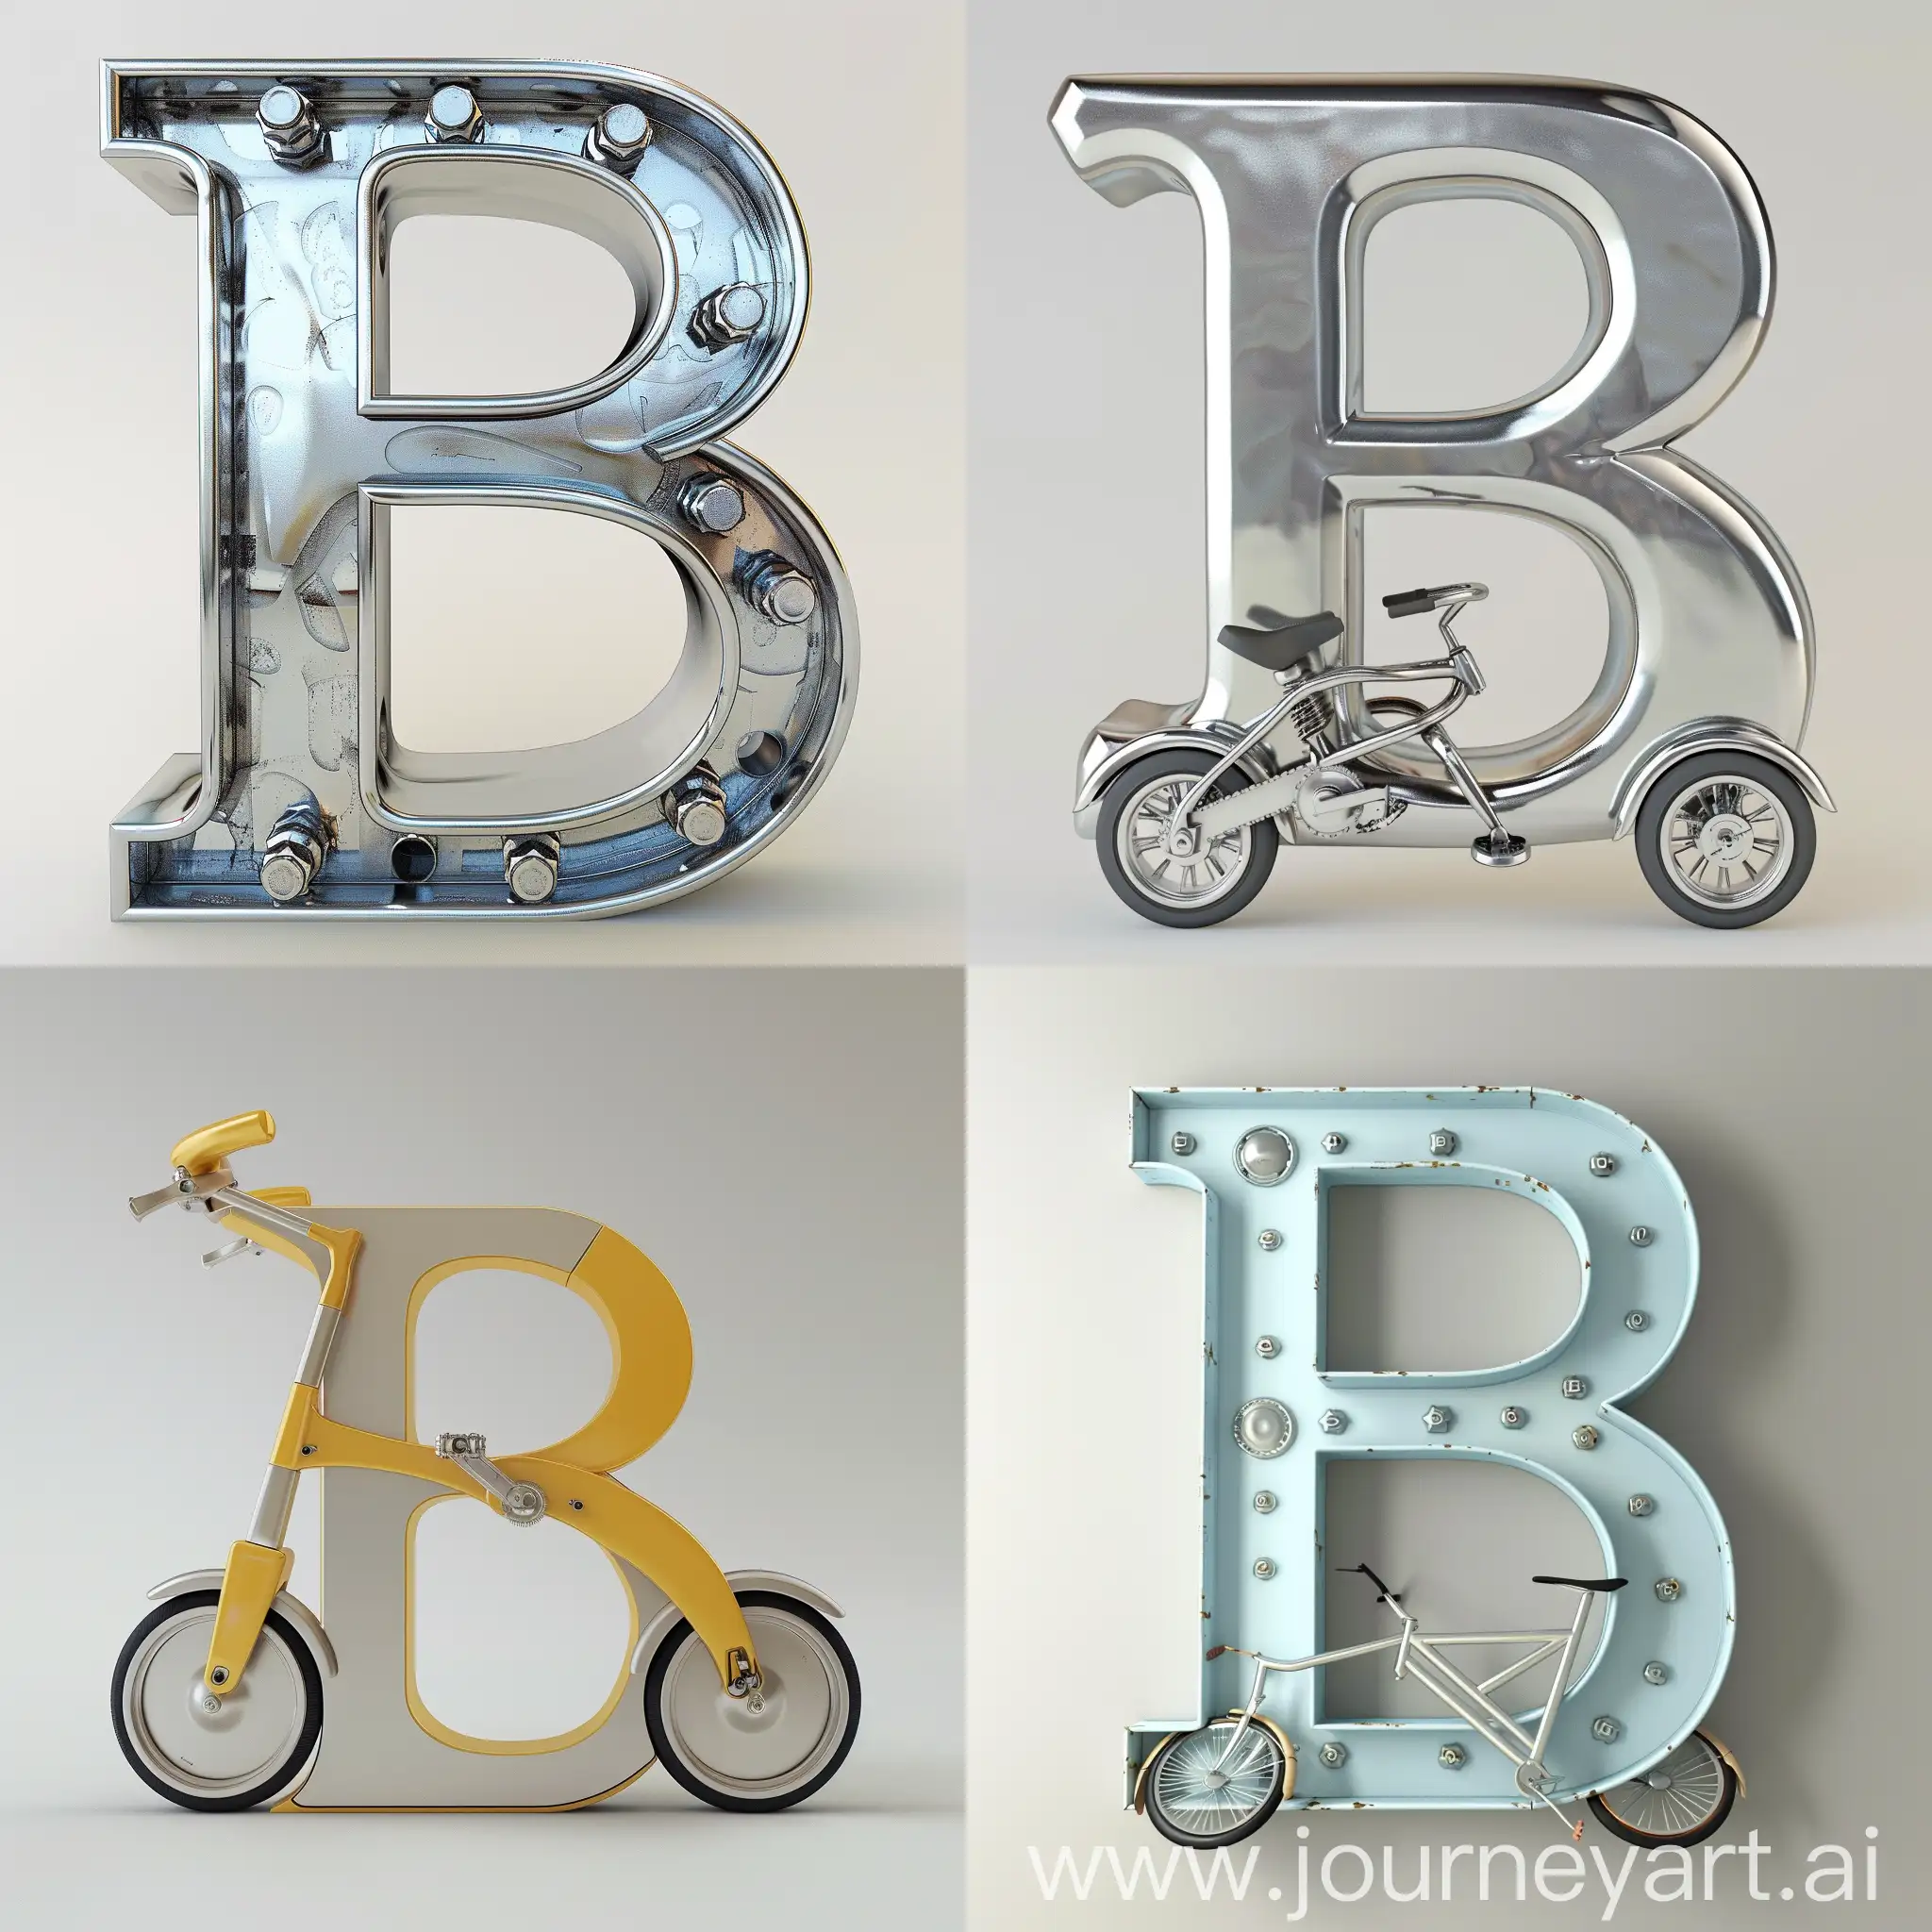 Bike in the form of the letter B